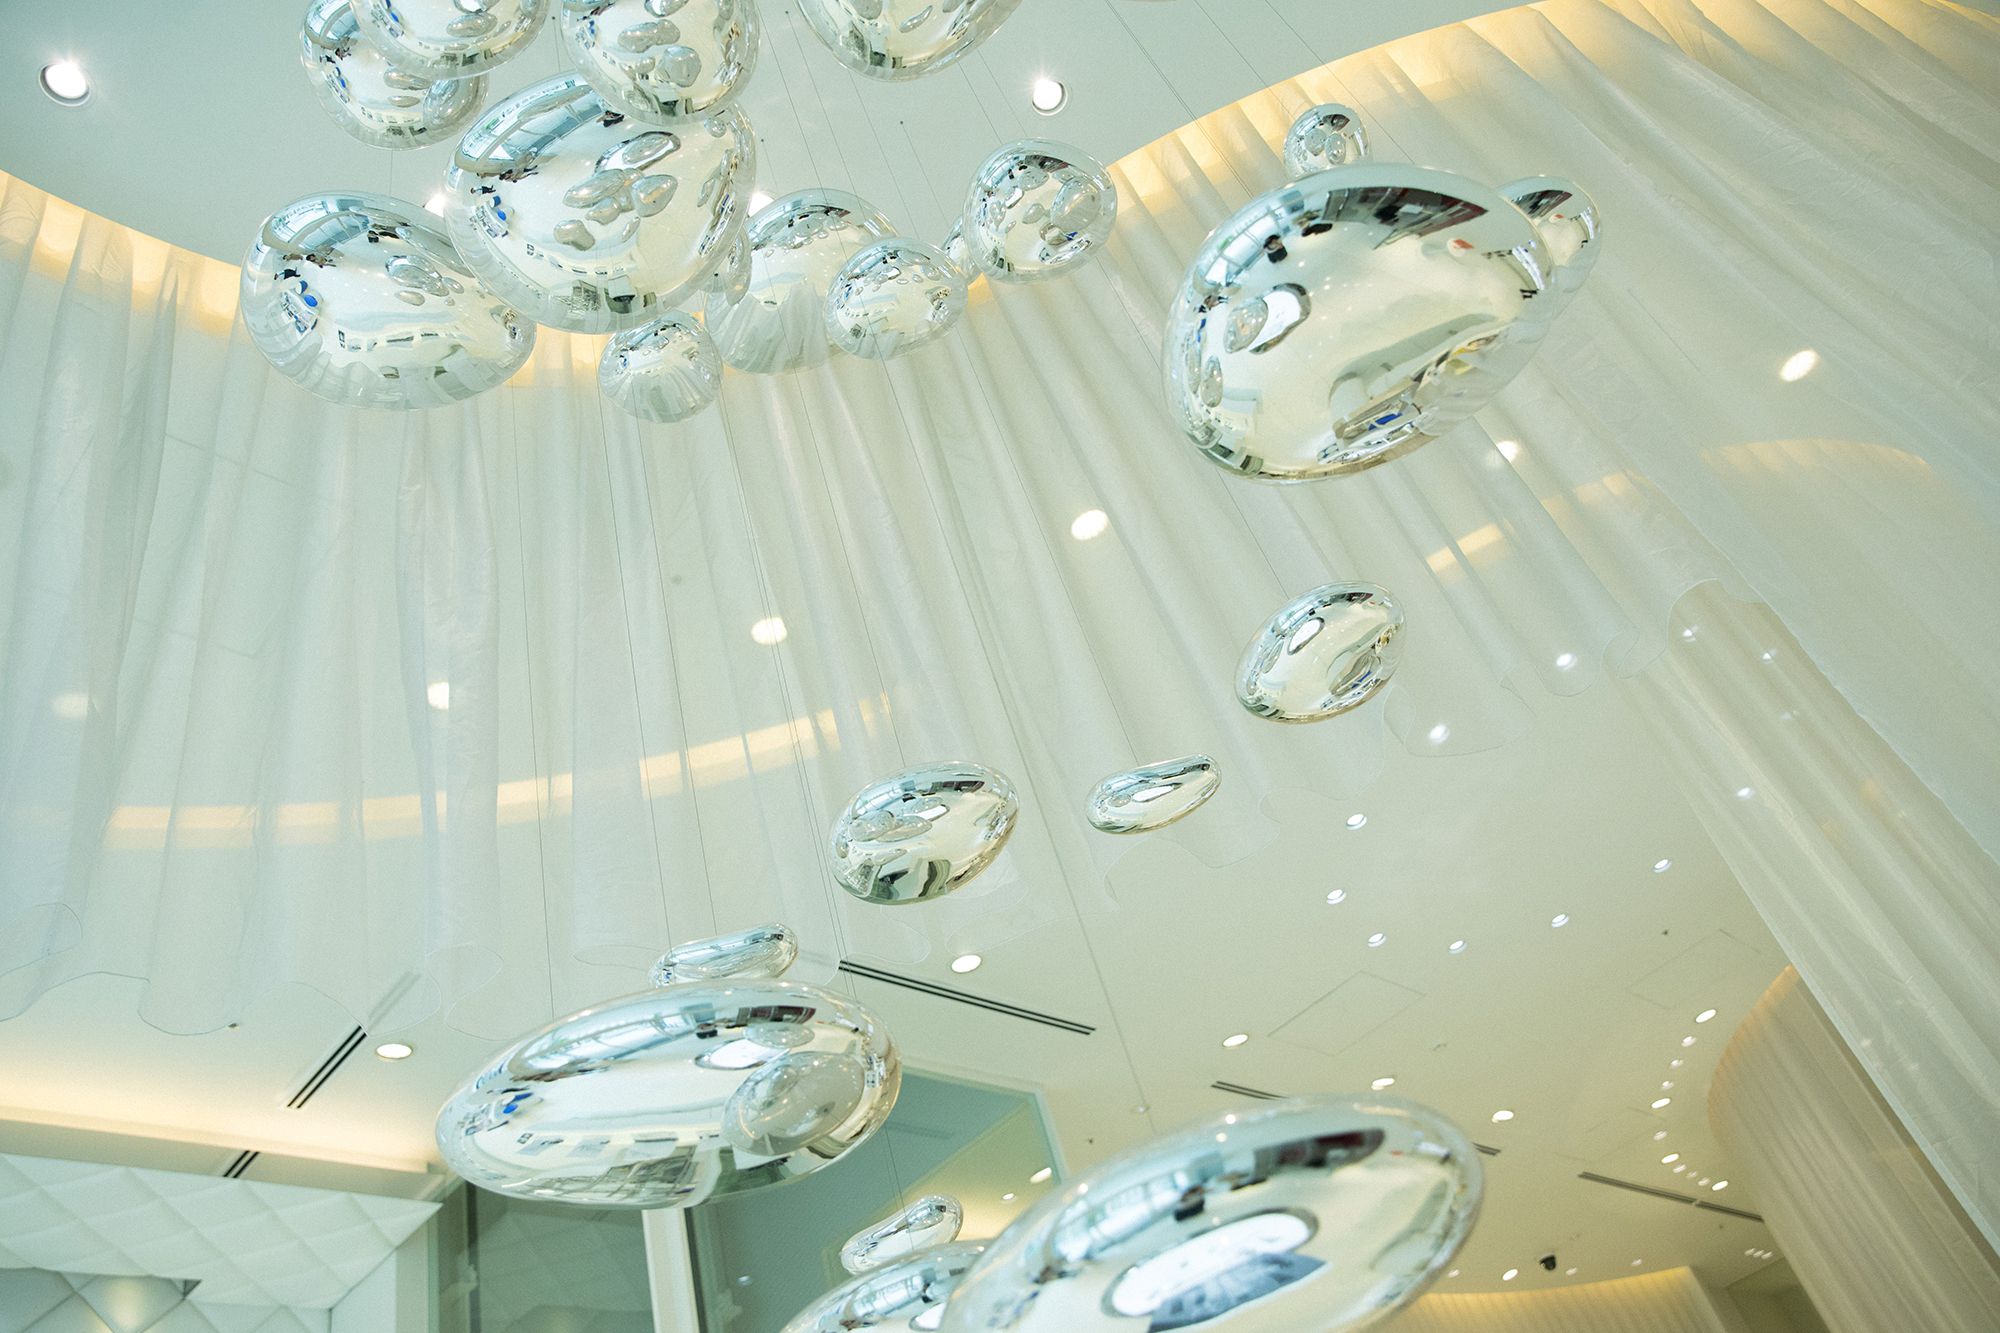 The ceiling art objects were designed by Jean-Philippe Nuel. Customers are welcomed to experience the various cosmetics on the Ground Floor. POLA’s beauty directors offer skincare counseling and makeup touch ups.